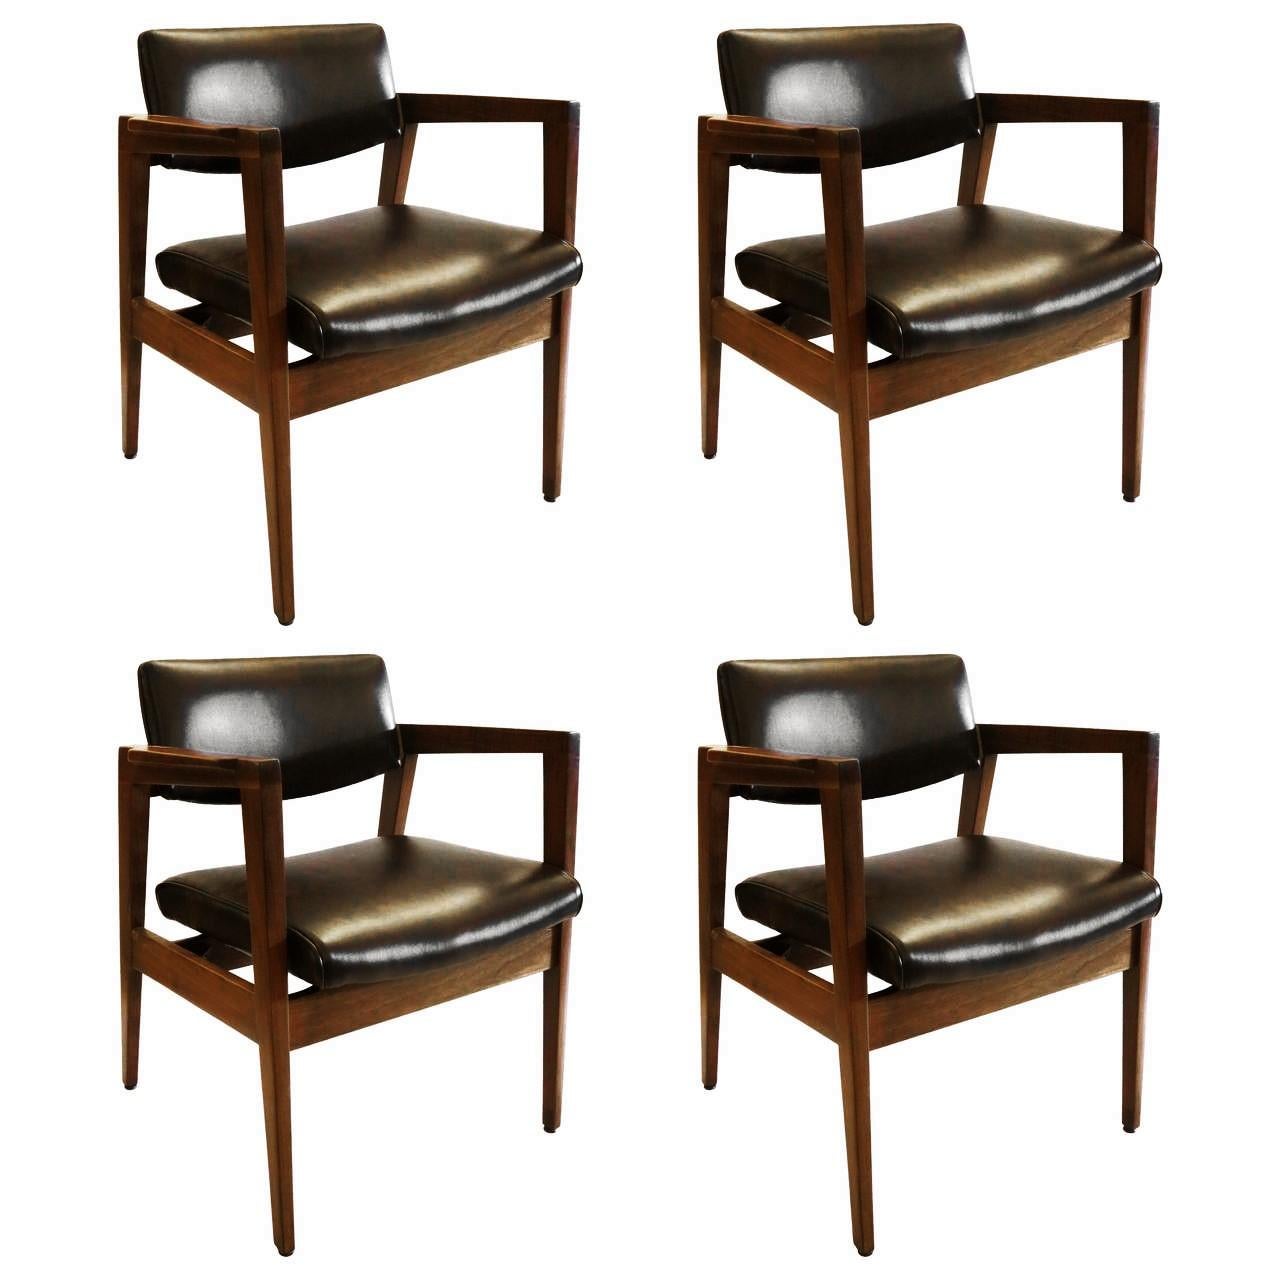 Classic Set of Four Armchairs by W.H. Gunlocke Chair Co. For Sale